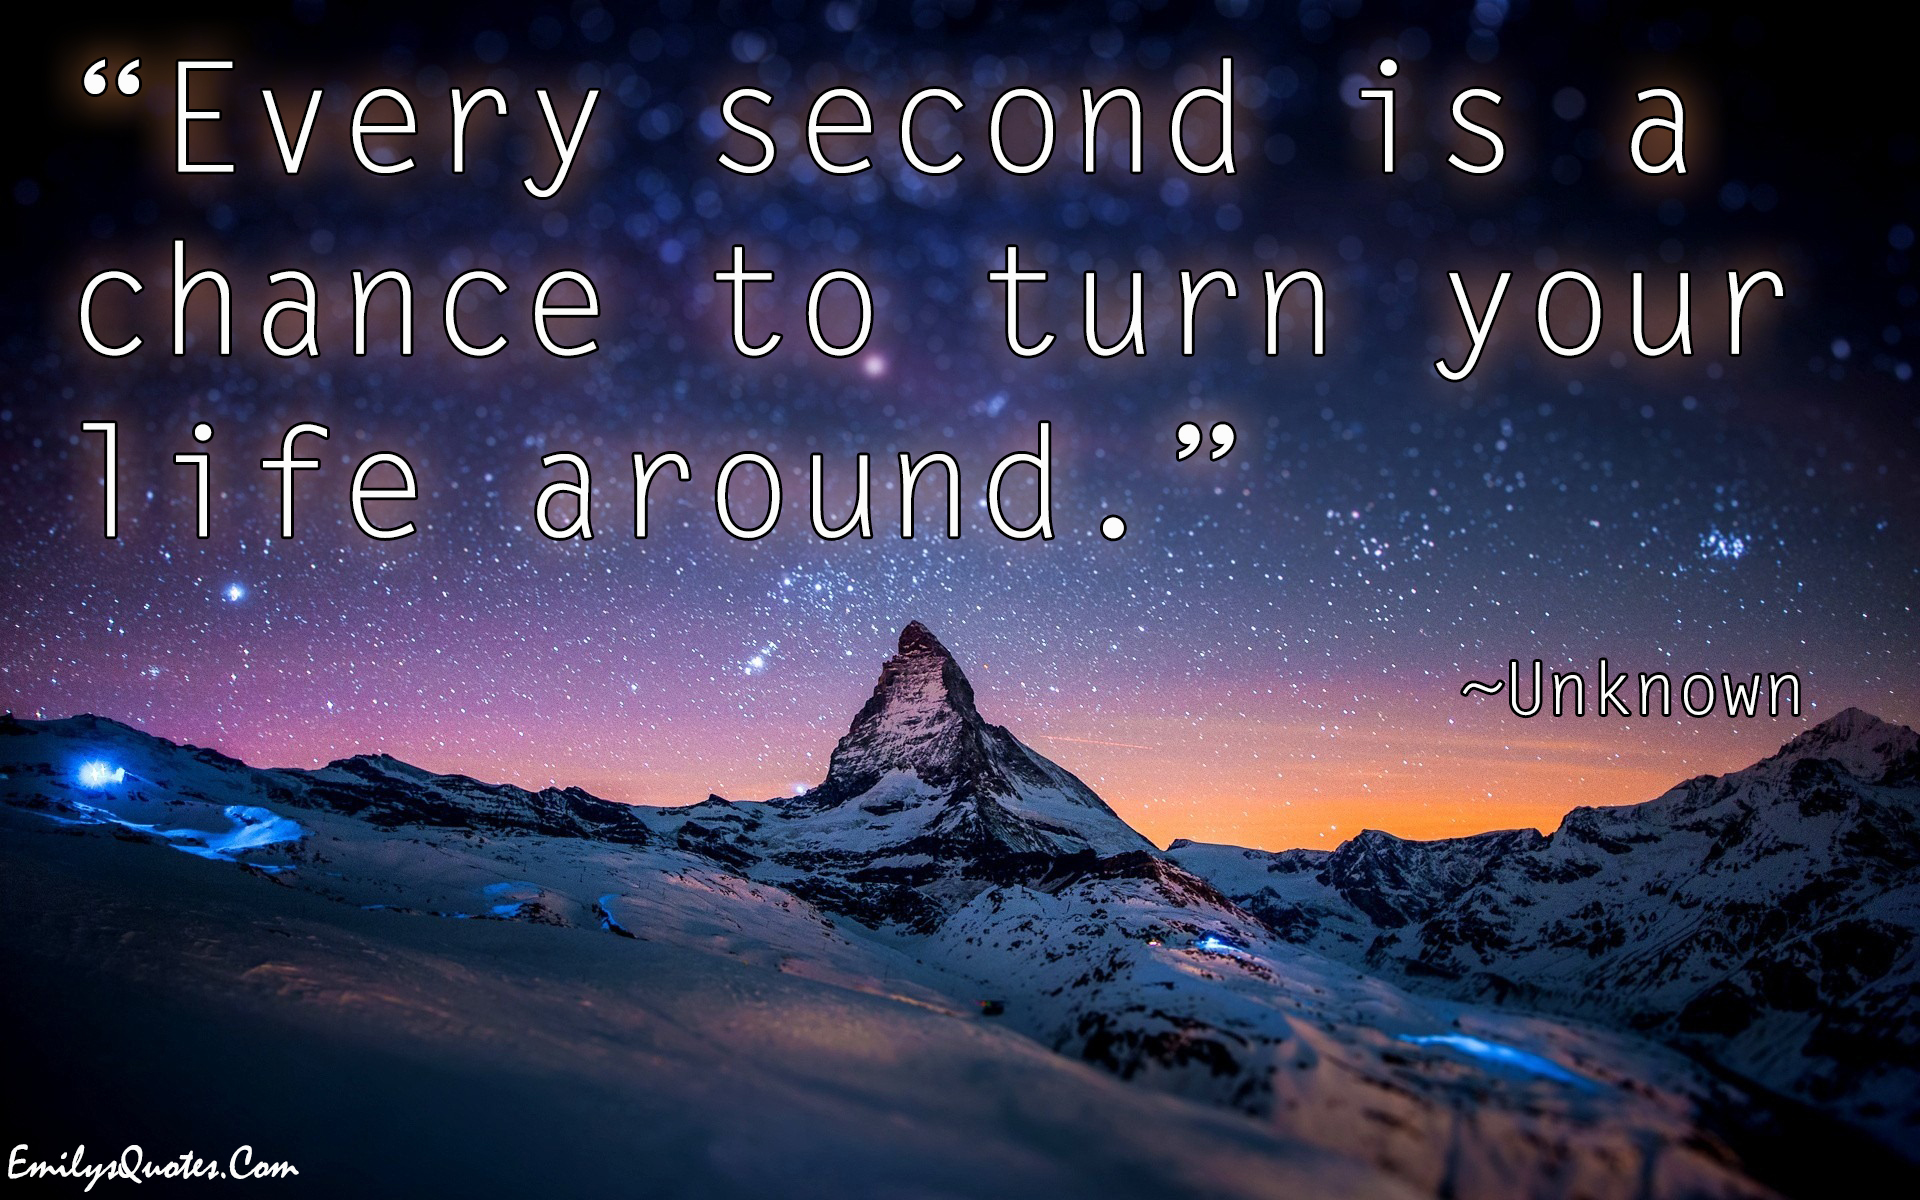 Every second is a chance to turn your life around